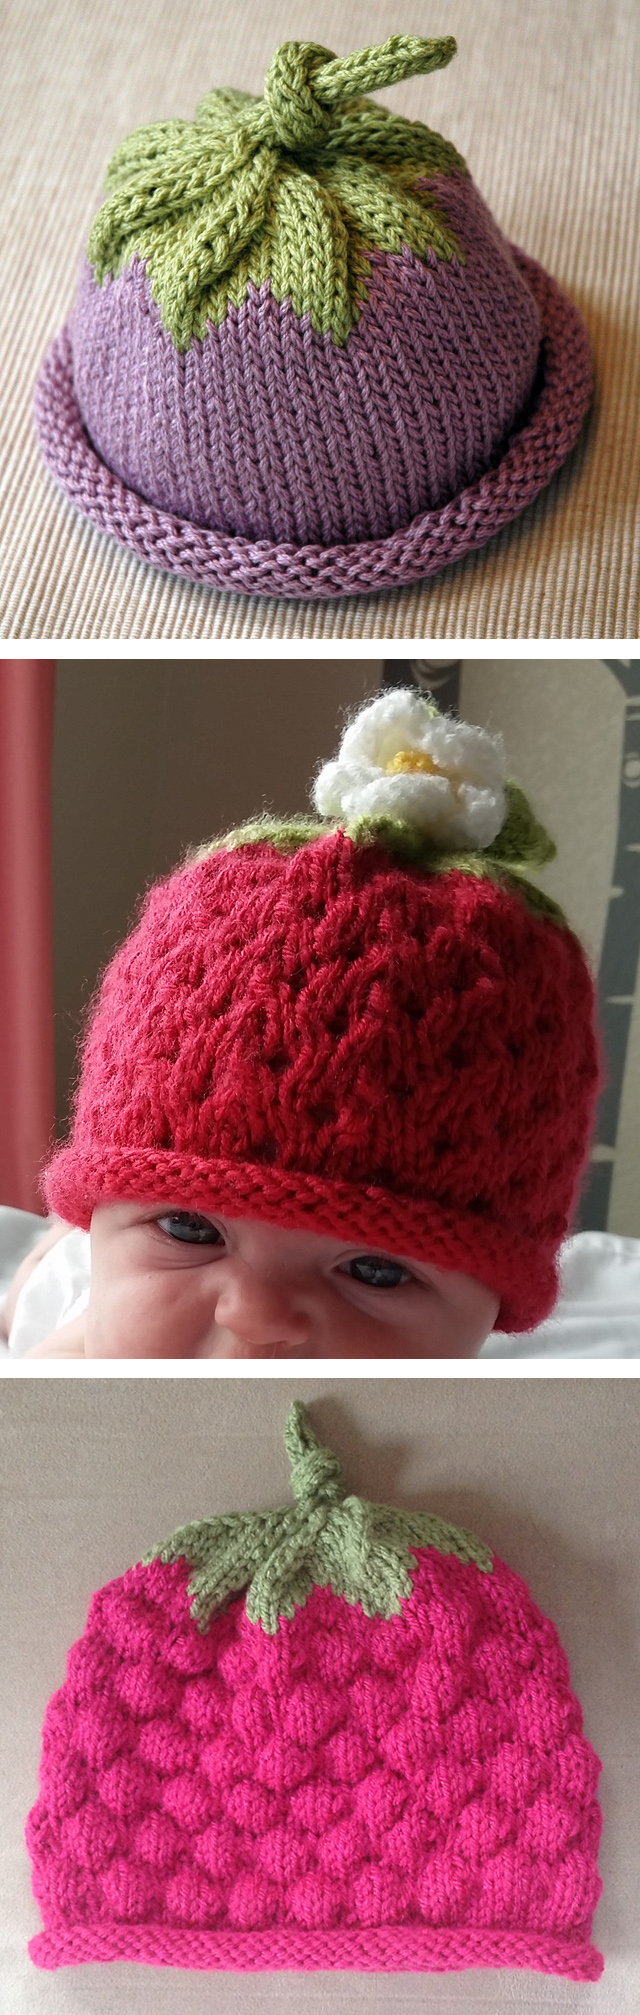 Free Knitting Patterns For Babies Hats Fruit Knitting Patterns In The Loop Knitting